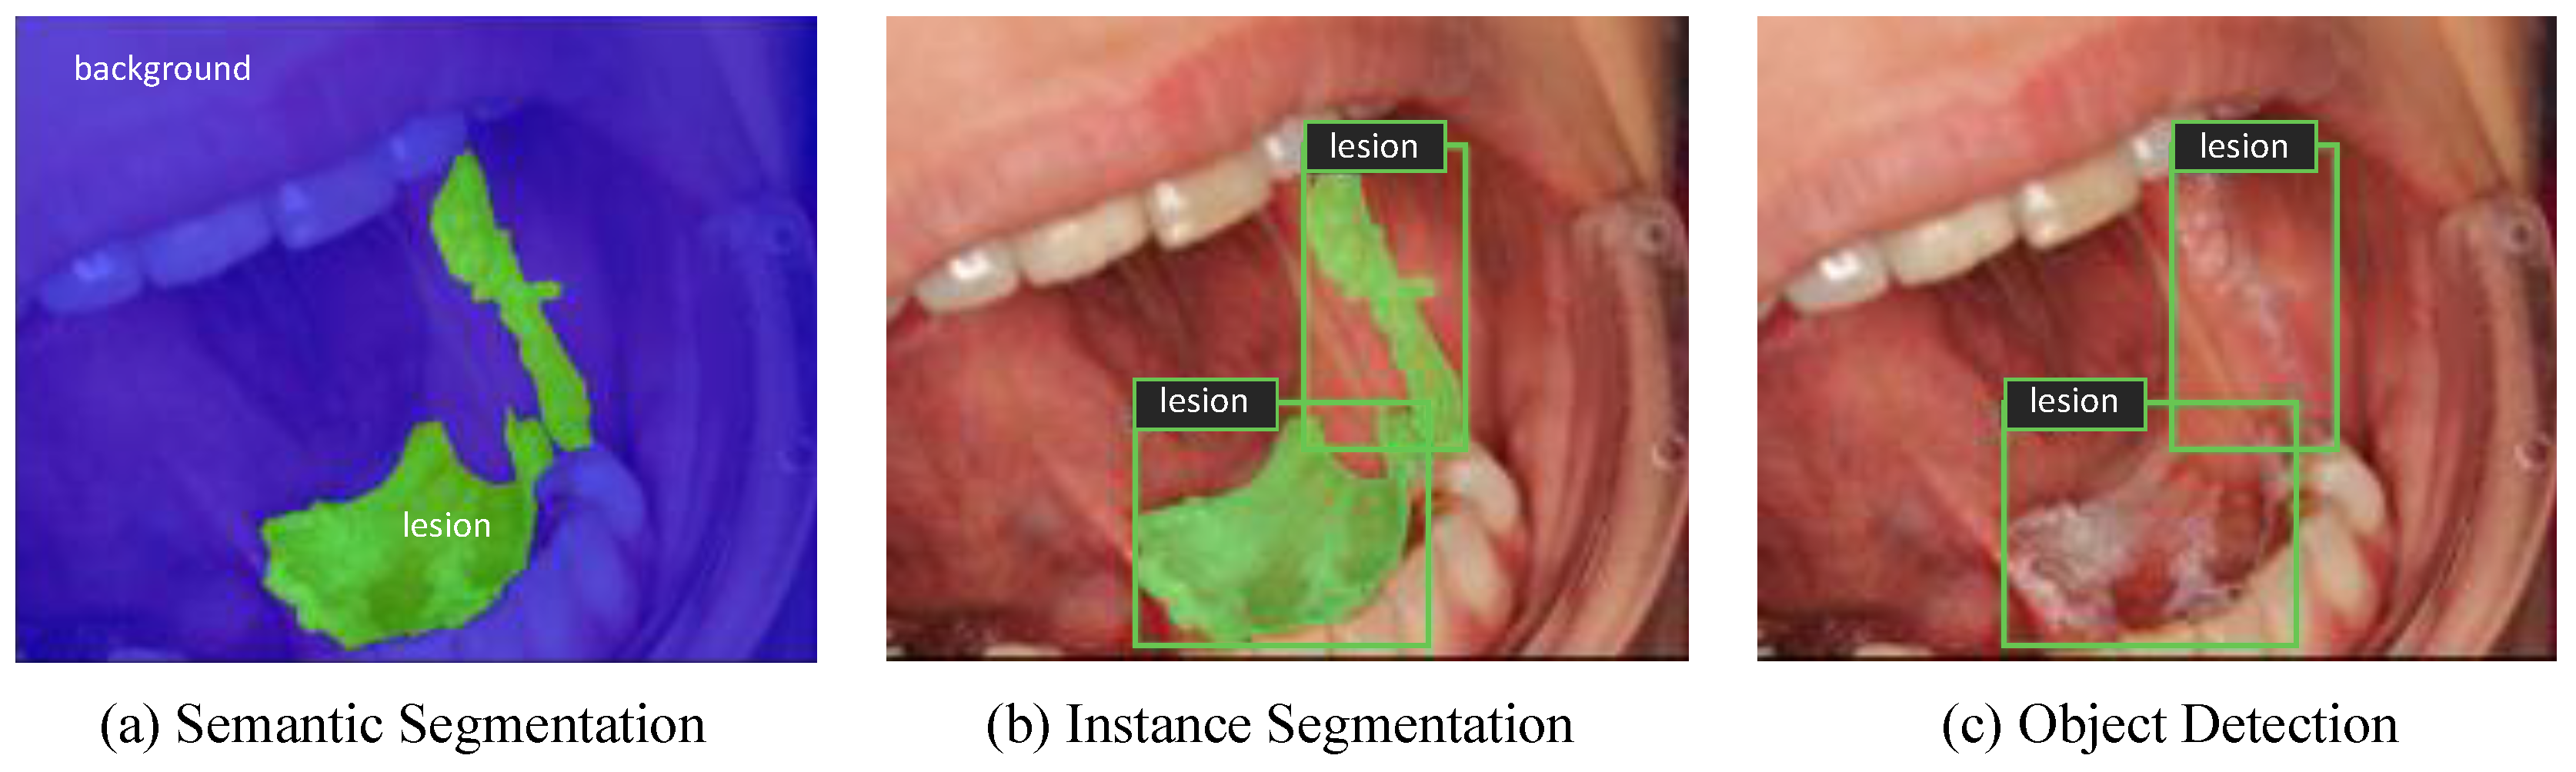 Cancers | Free Full-Text | Automated Detection and Classification of Oral  Lesions Using Deep Learning to Detect Oral Potentially Malignant Disorders